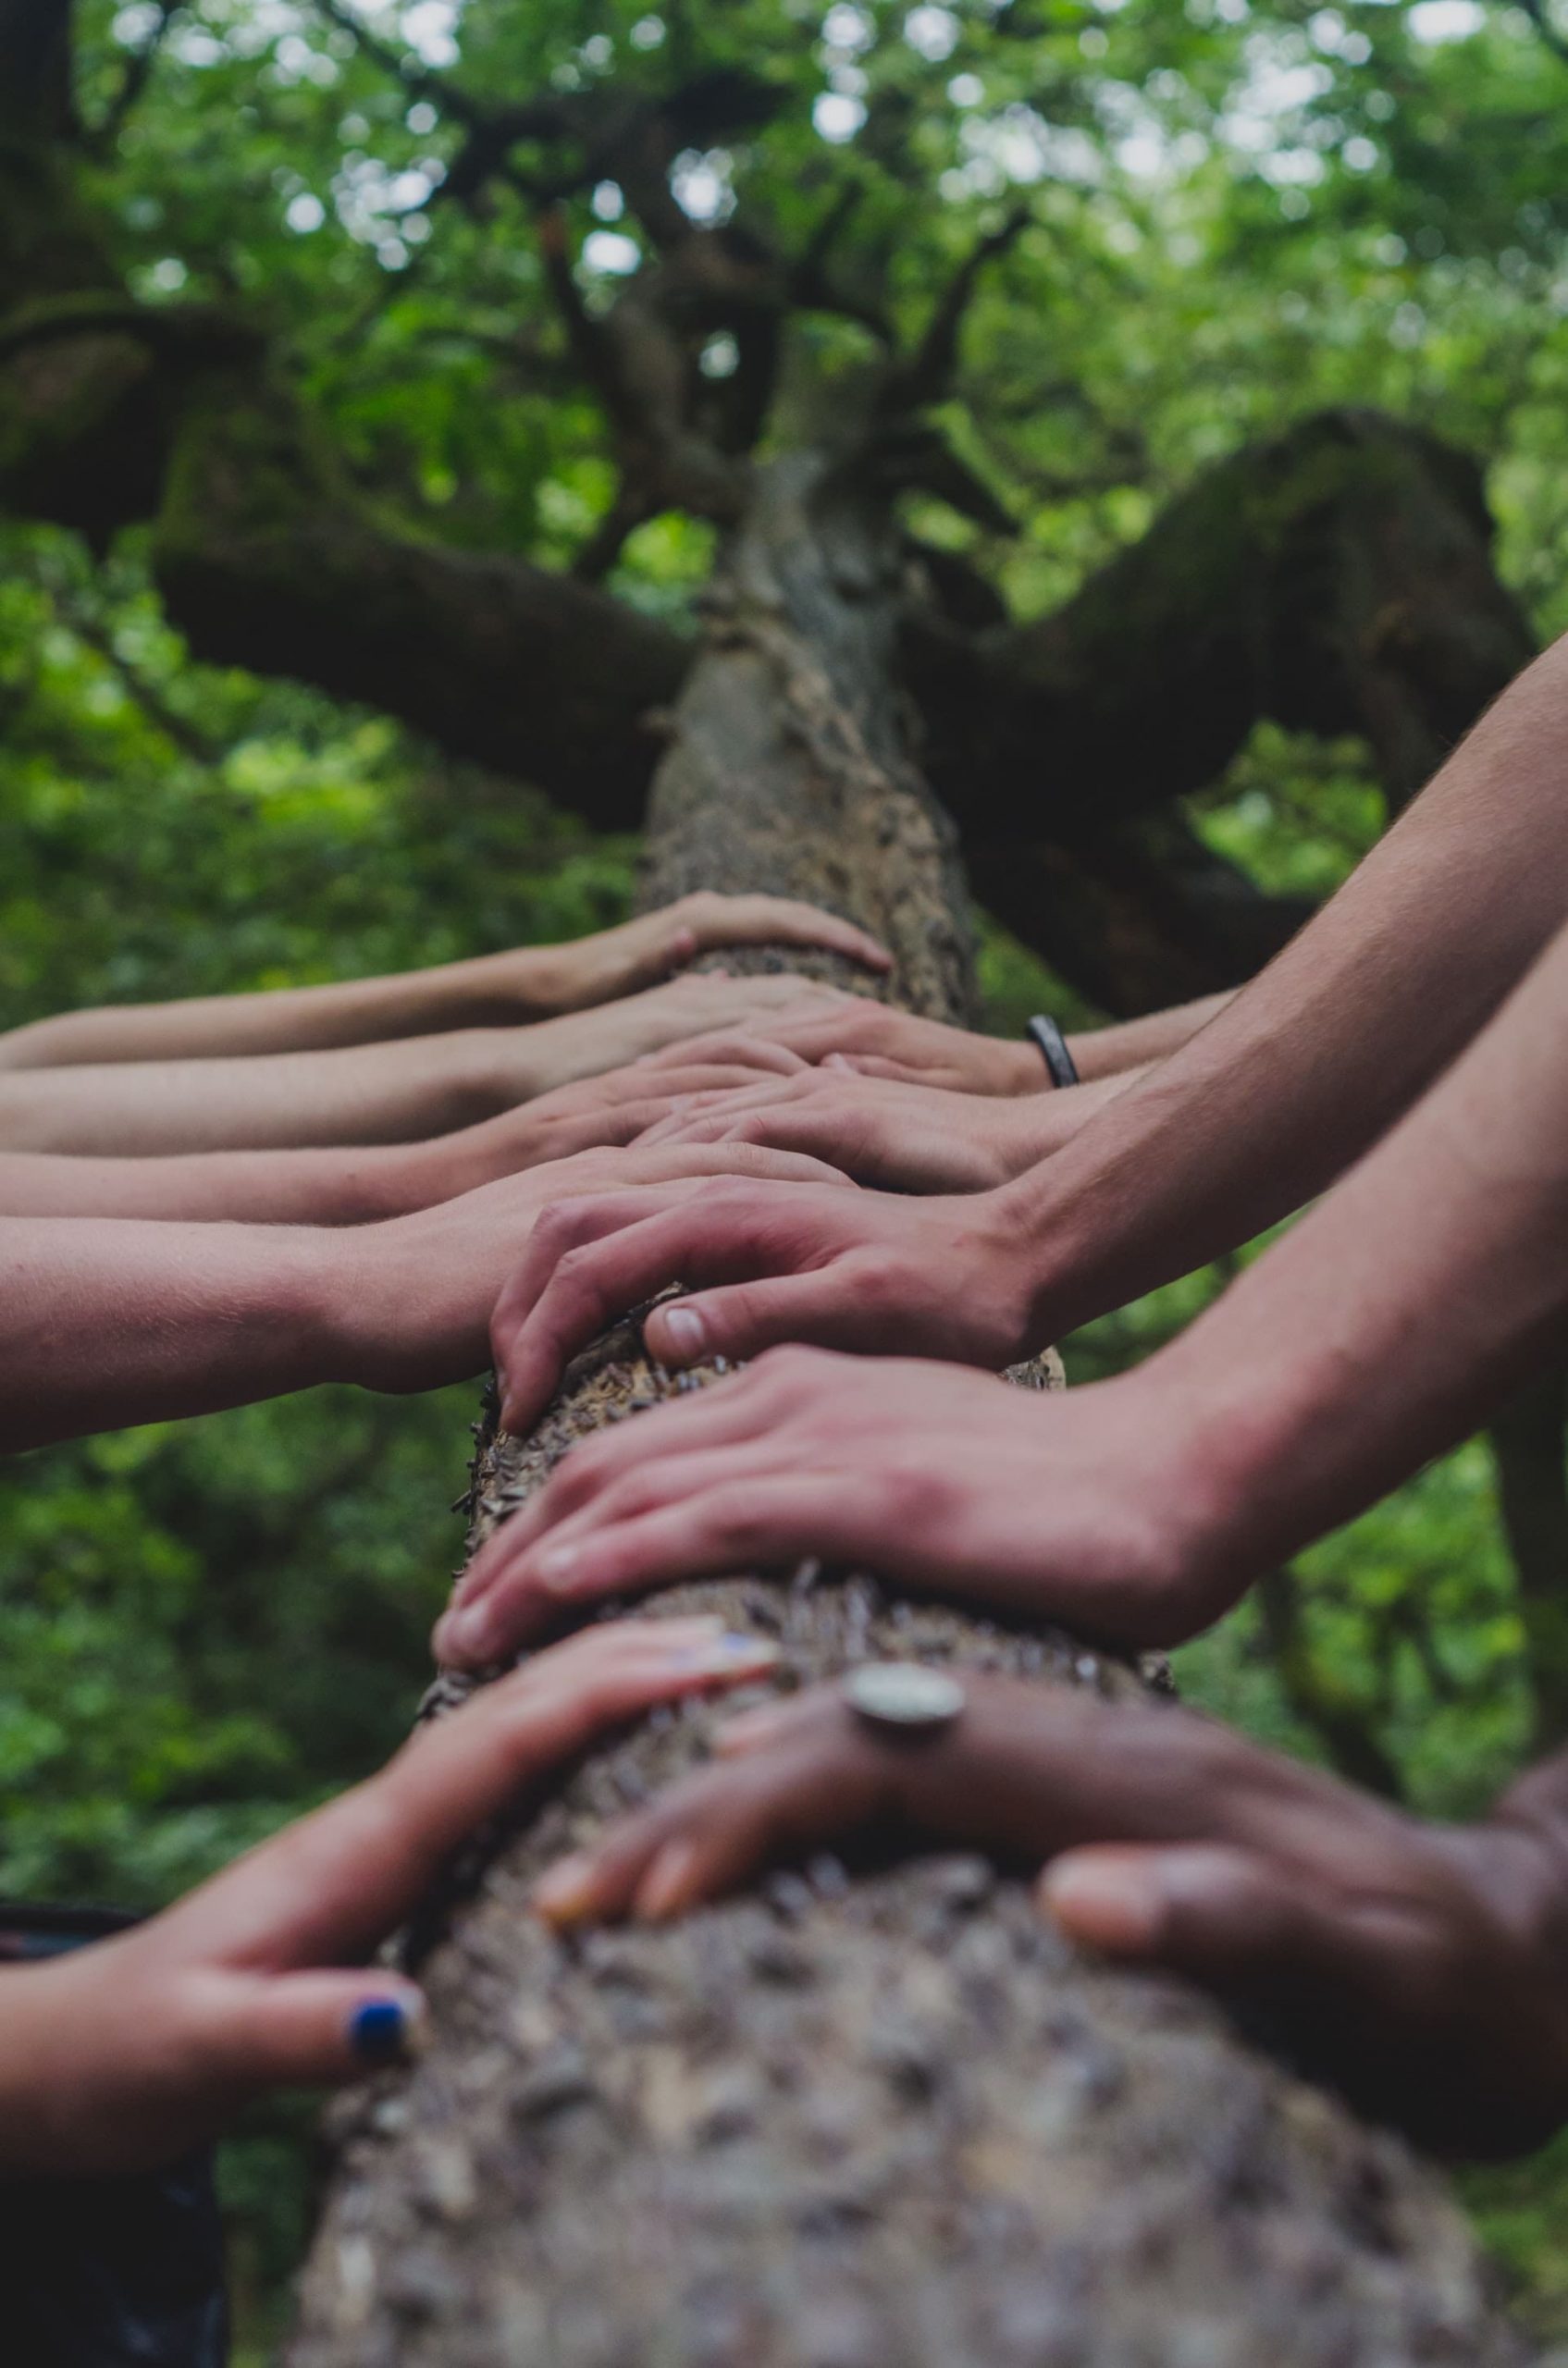 Hands on a tree branch.